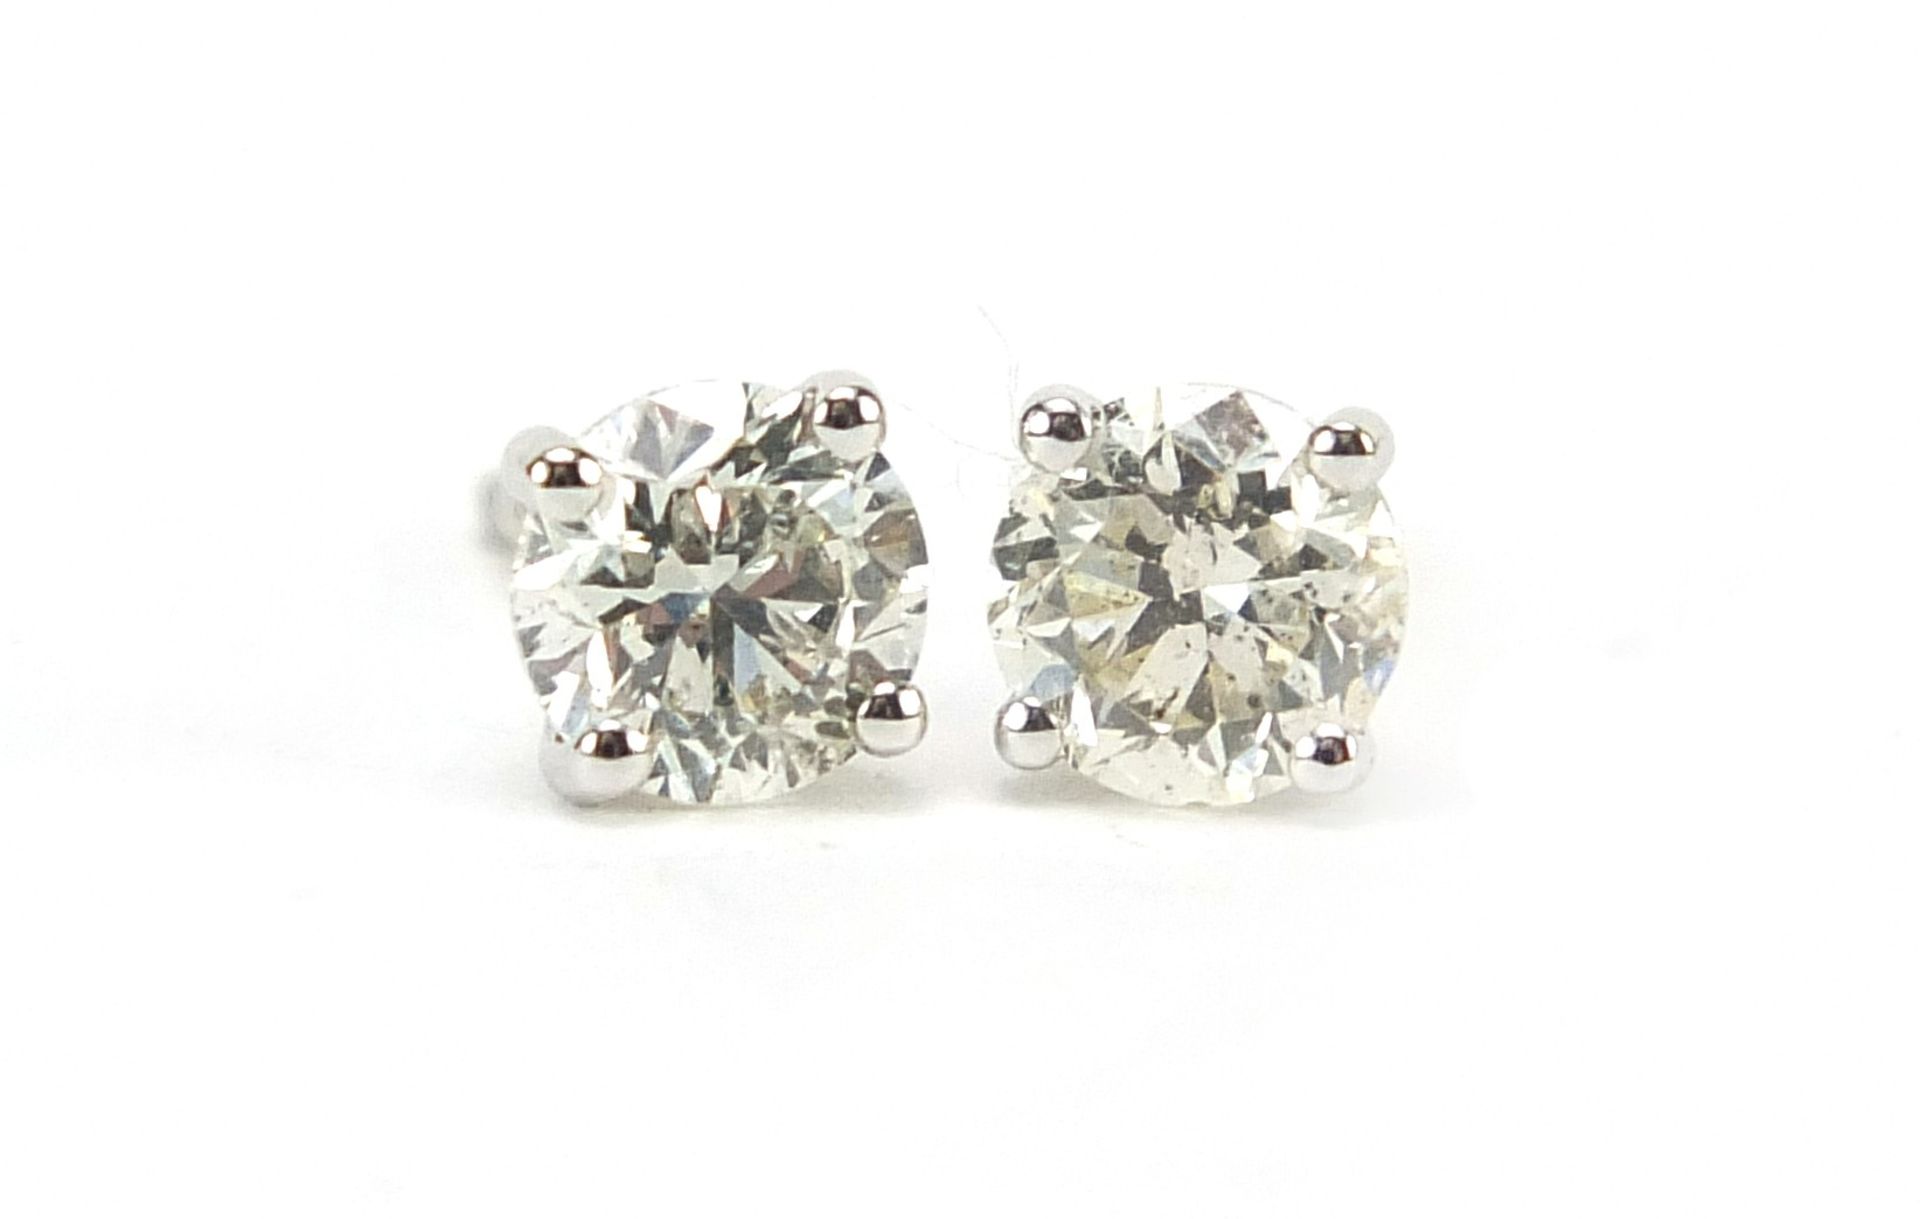 Pair of 18ct white gold diamond solitaire stud earrings, total diamond weight approximately 1.04